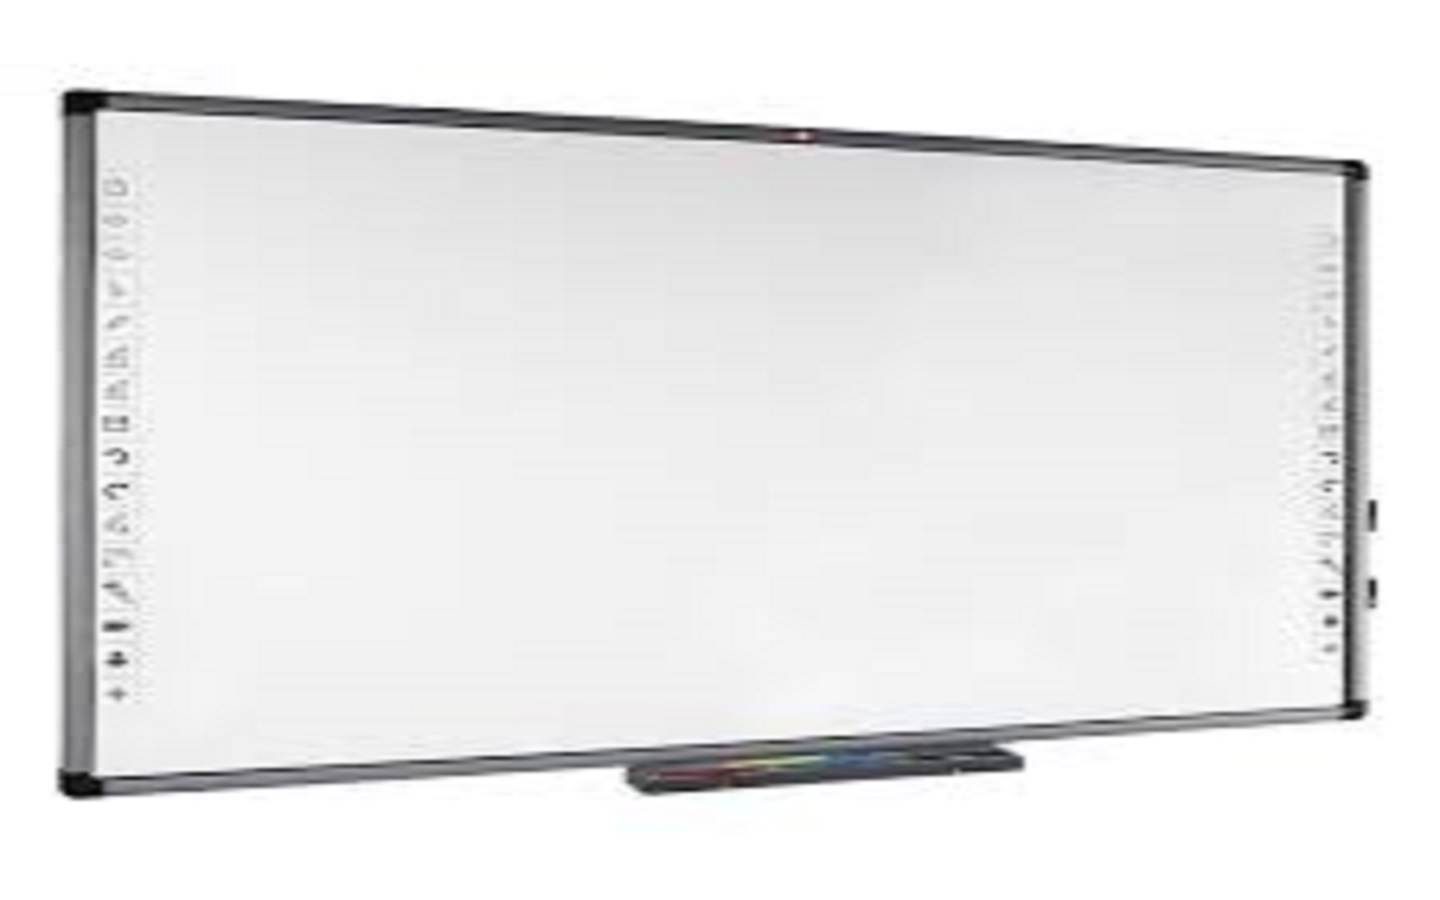 Interactive Whiteboard Market Size, Status, Growth | Industry Analysis Report